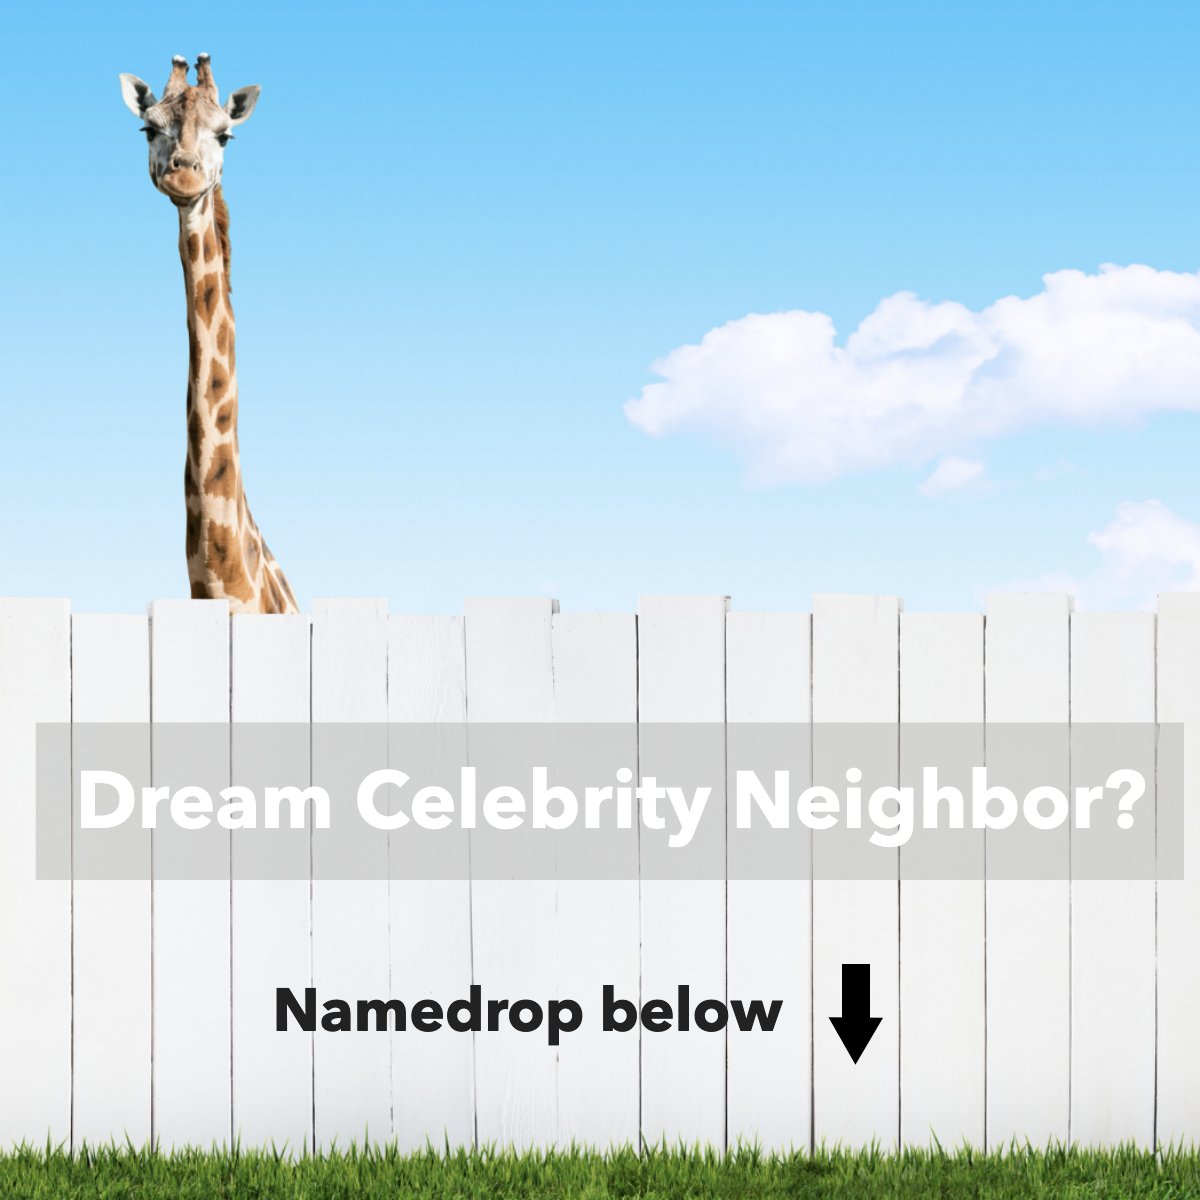 Imagine having a huge celebrity as a neighbor! ⭐️ Who would you like it to be? 😯 #question #neighbor #dreamhouse #celebrity #cherylcitro